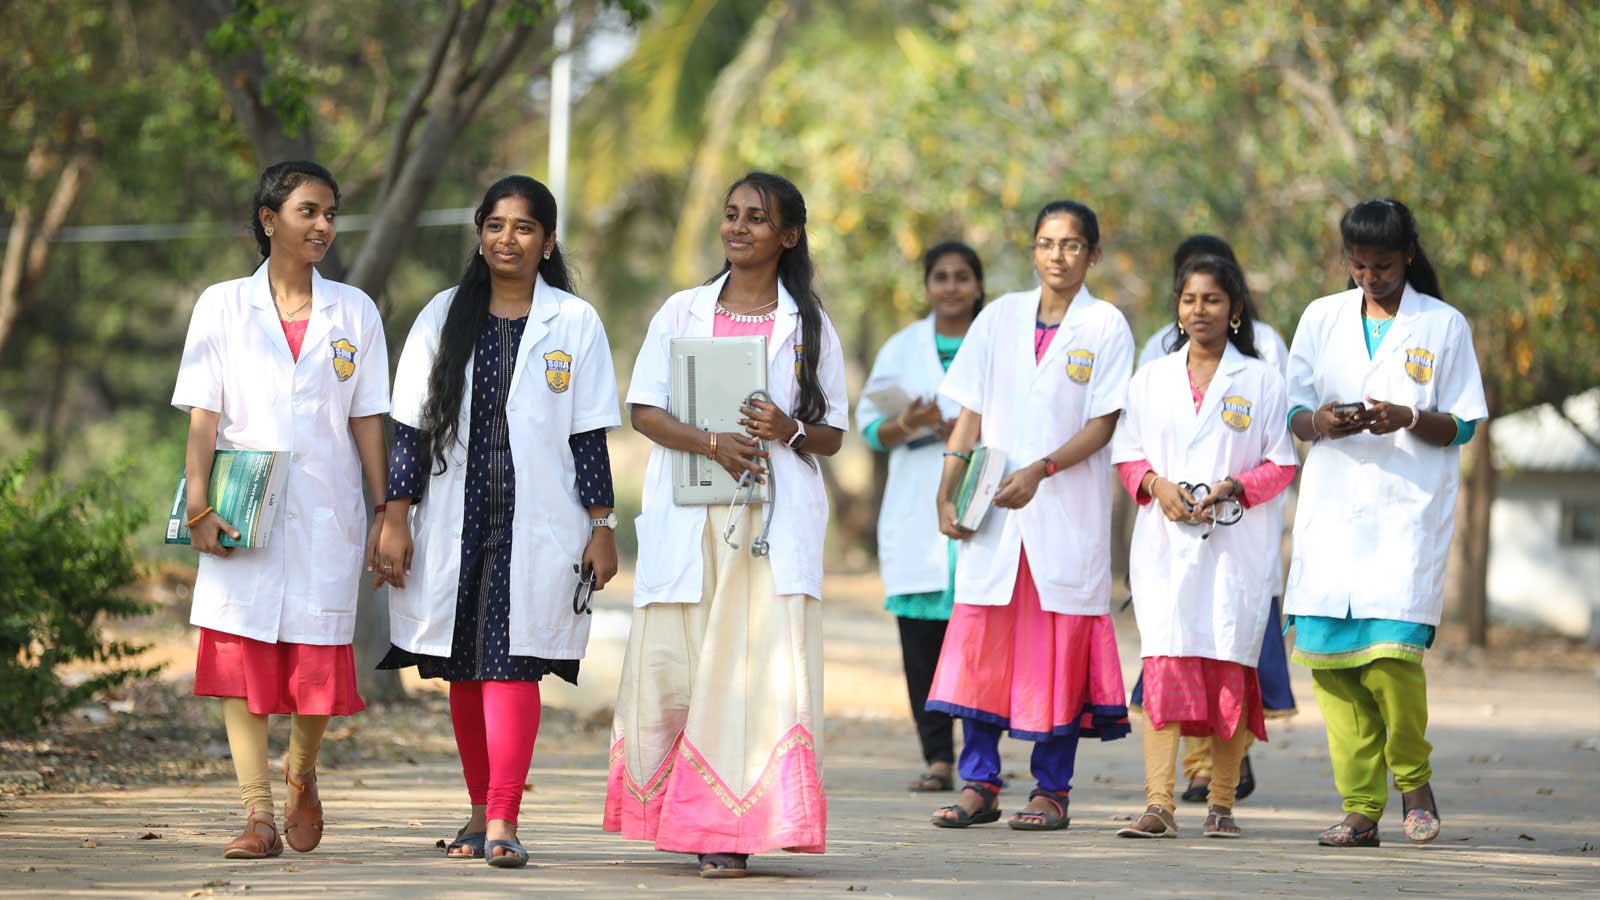 Sona Medical College Students